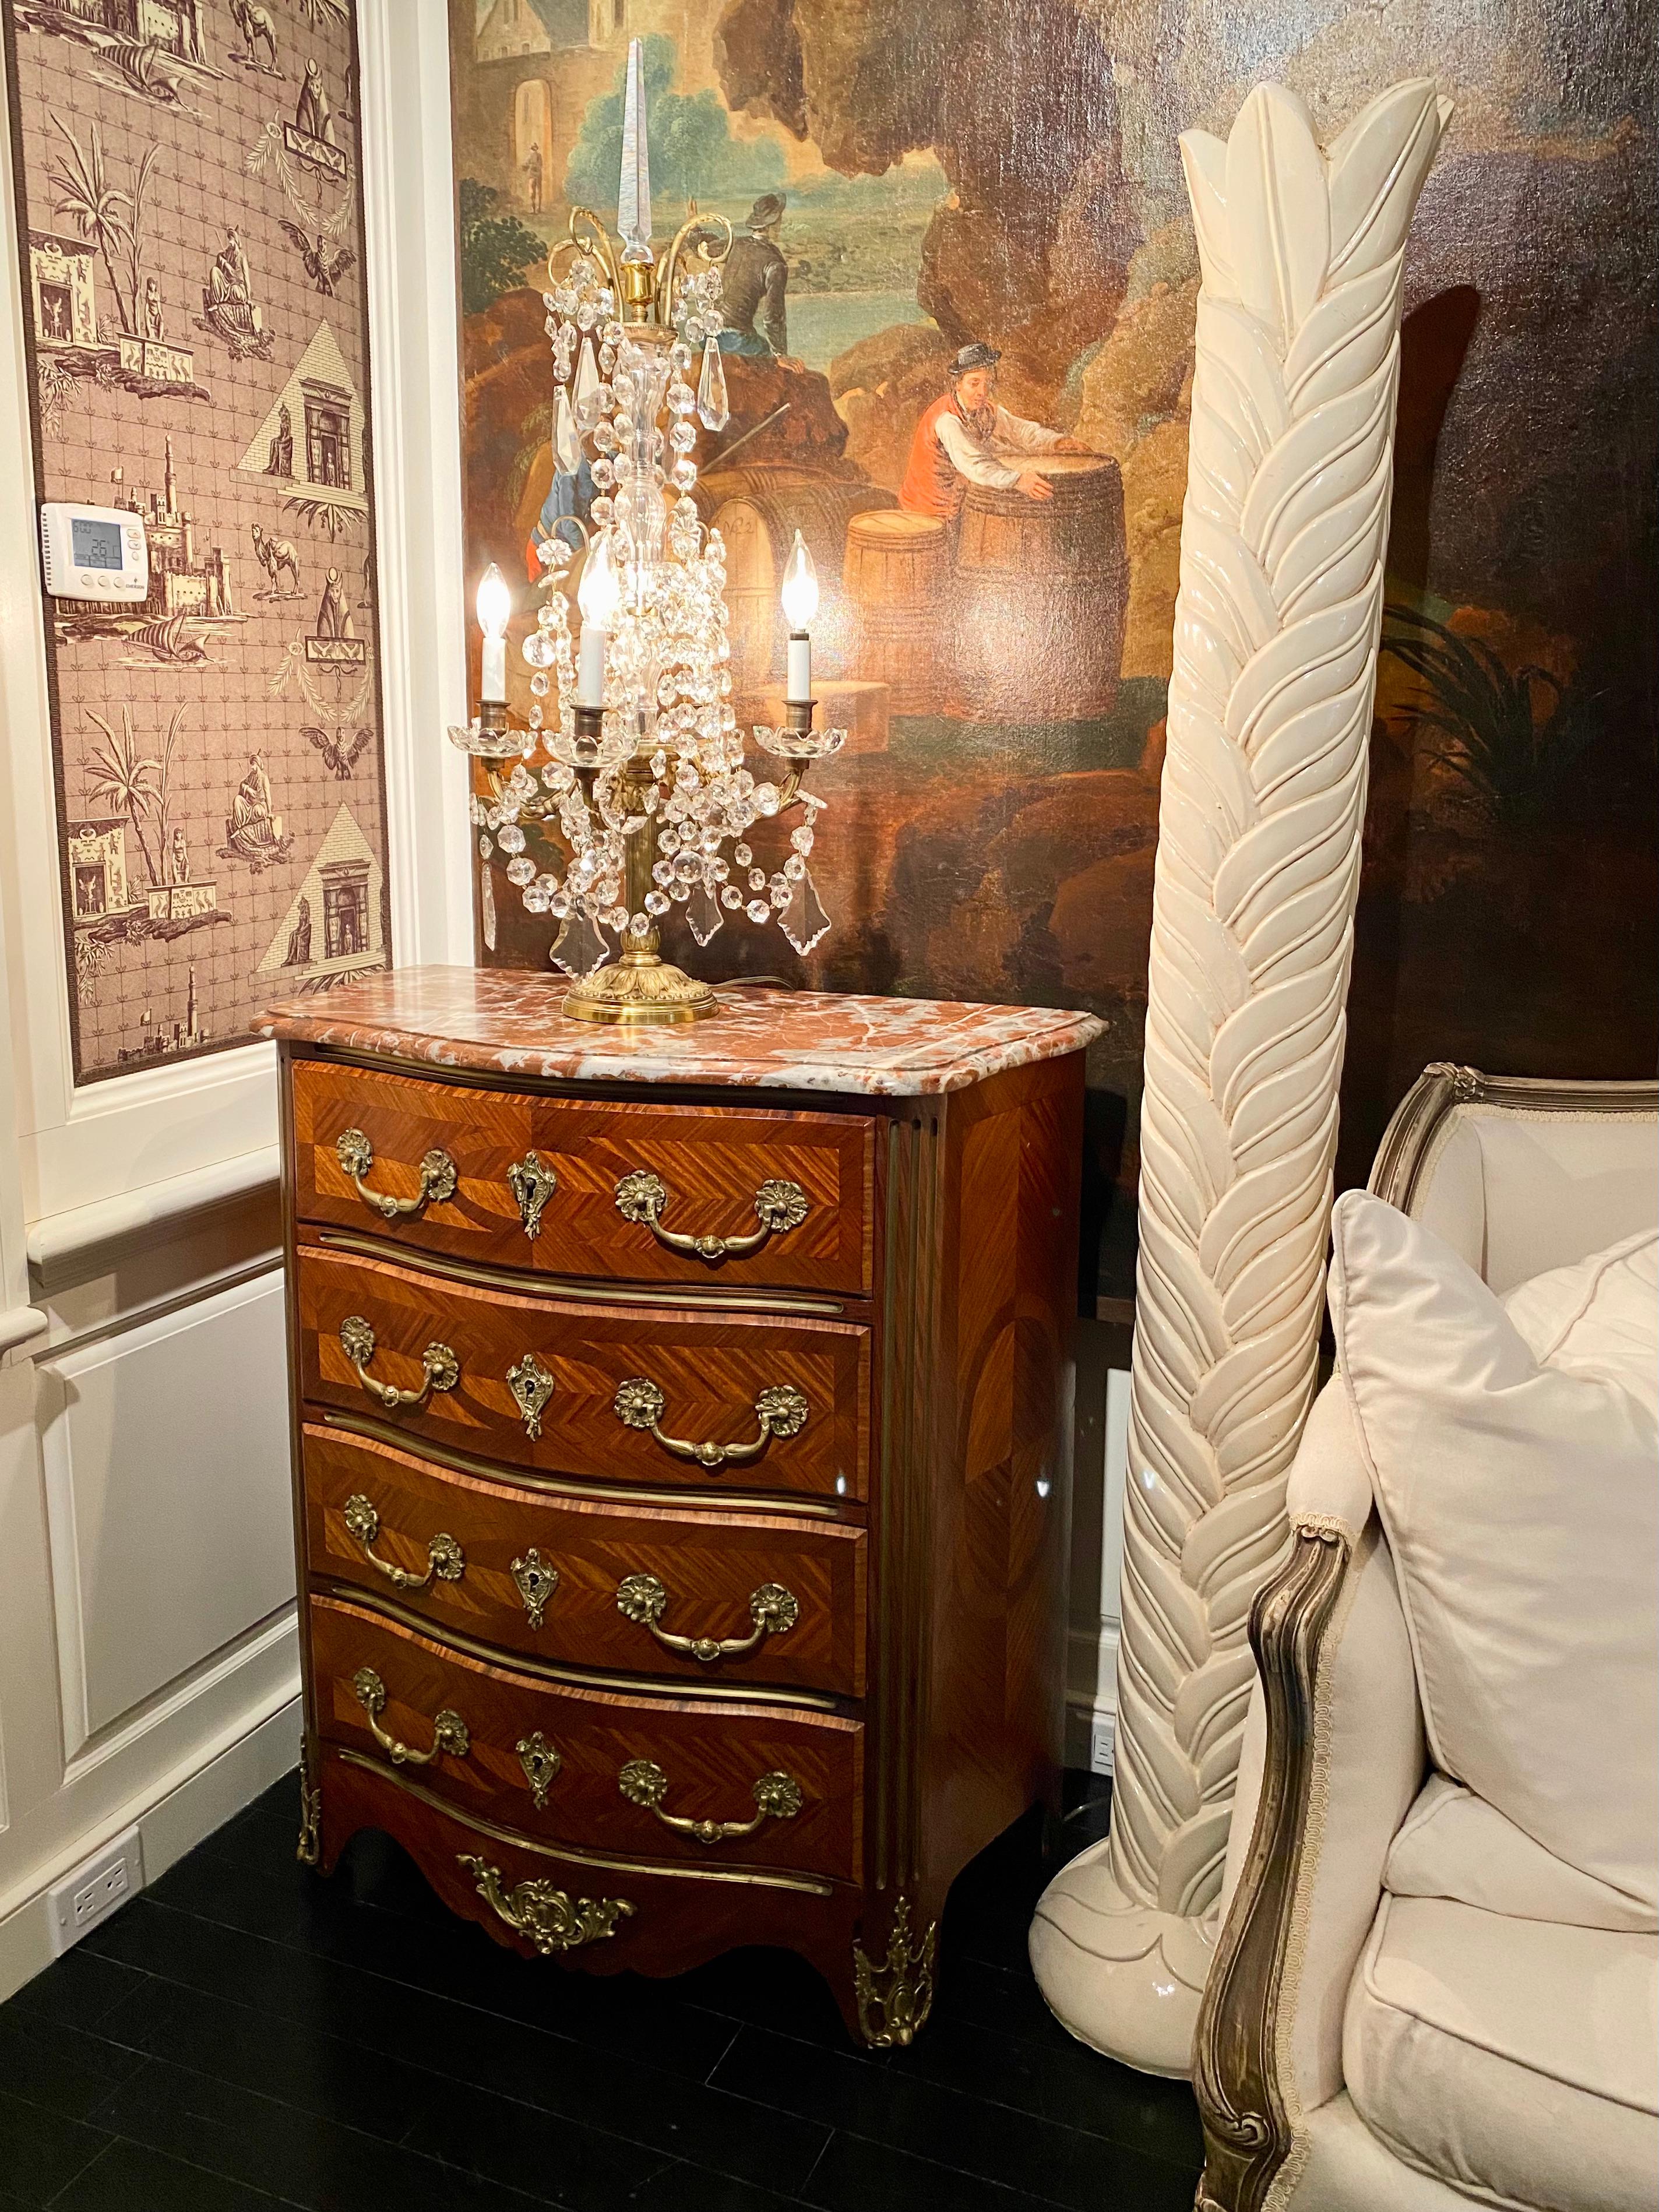 French Regence style commode or chest of drawers, marble-top, 19th century. Diamond-shape parquetry veneer, four front drawers. Carved edges, red Languedoc marble top. Gilt bronze handles and details. Smaller size makes it a great, versatile